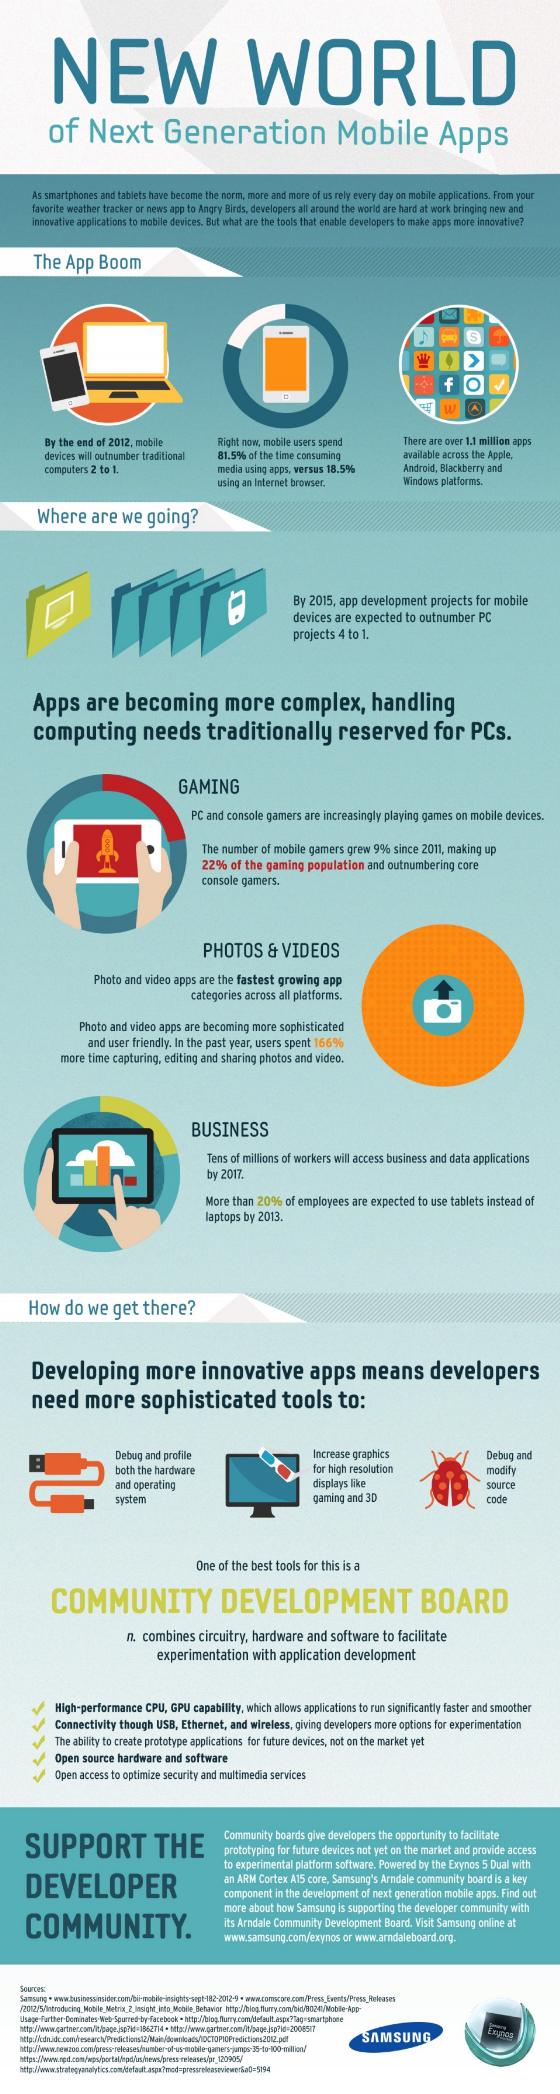 Next Generation Mobile Apps: Infographic